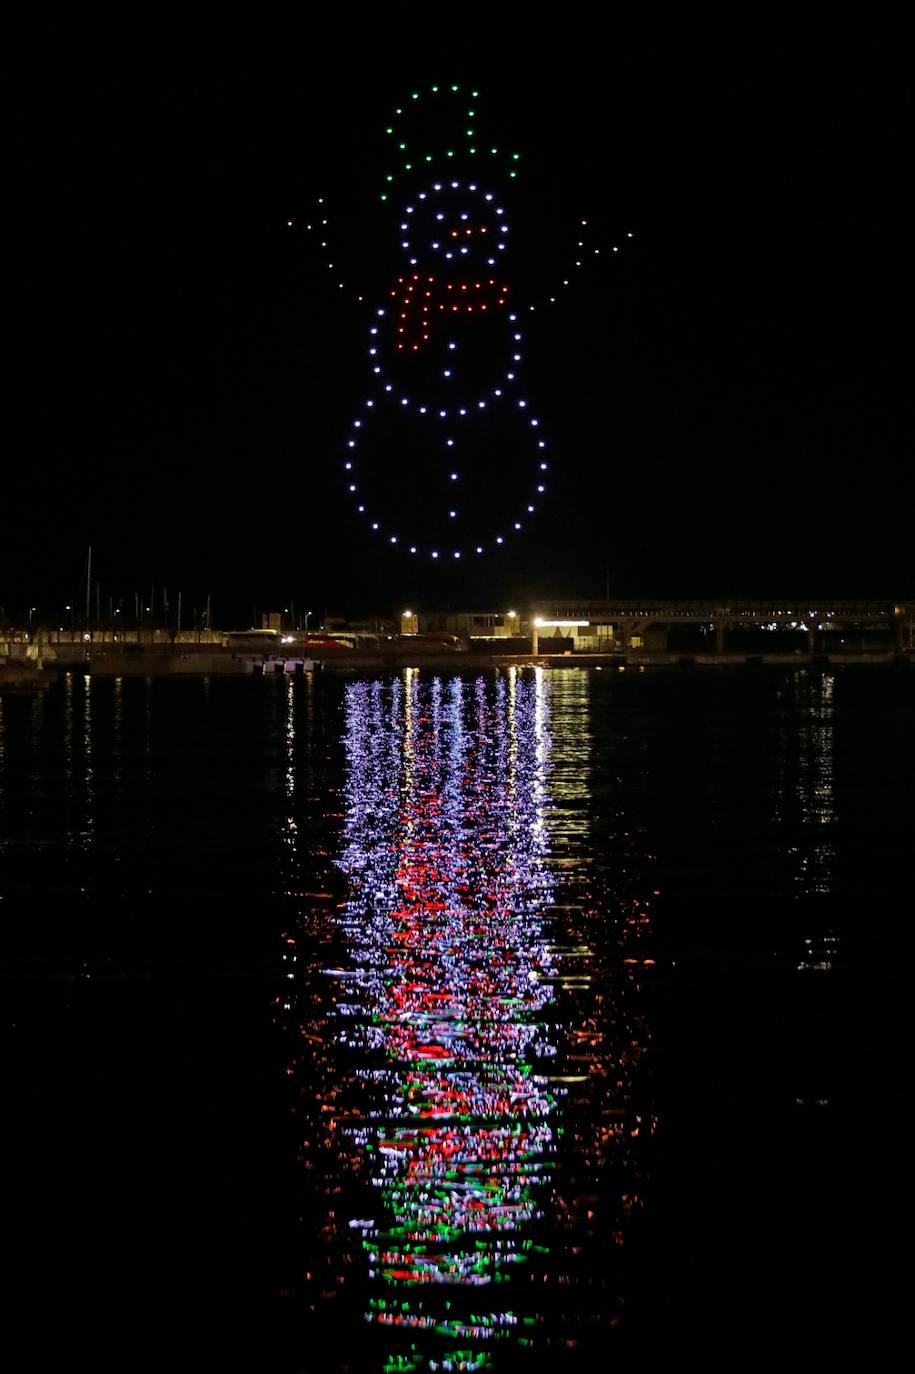 The drone Christmas show over the port of Malaga.